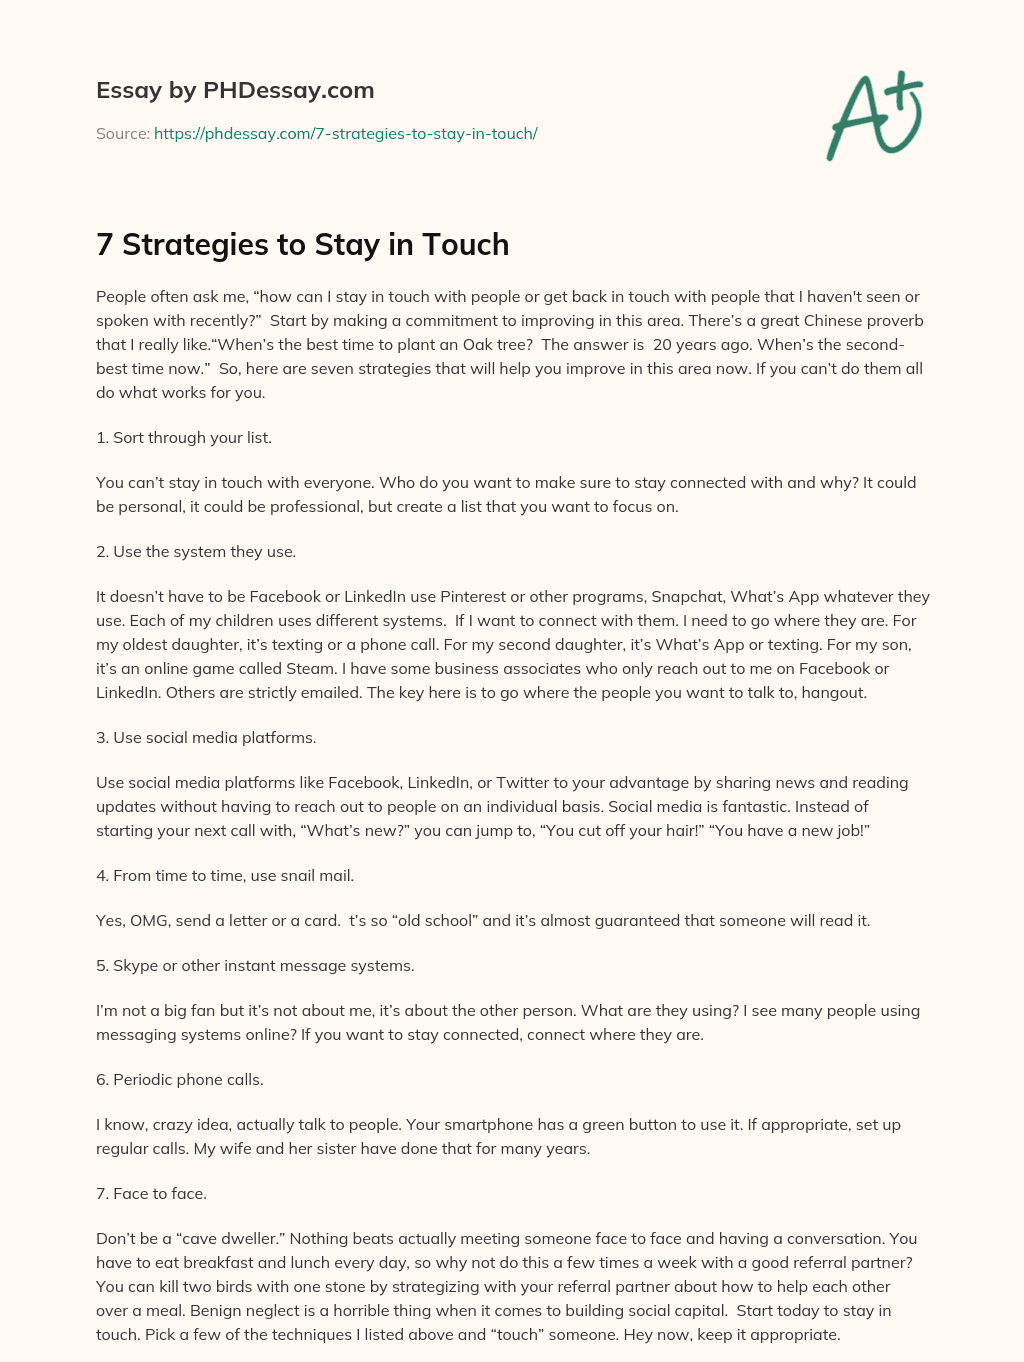 7 Strategies to Stay in Touch essay